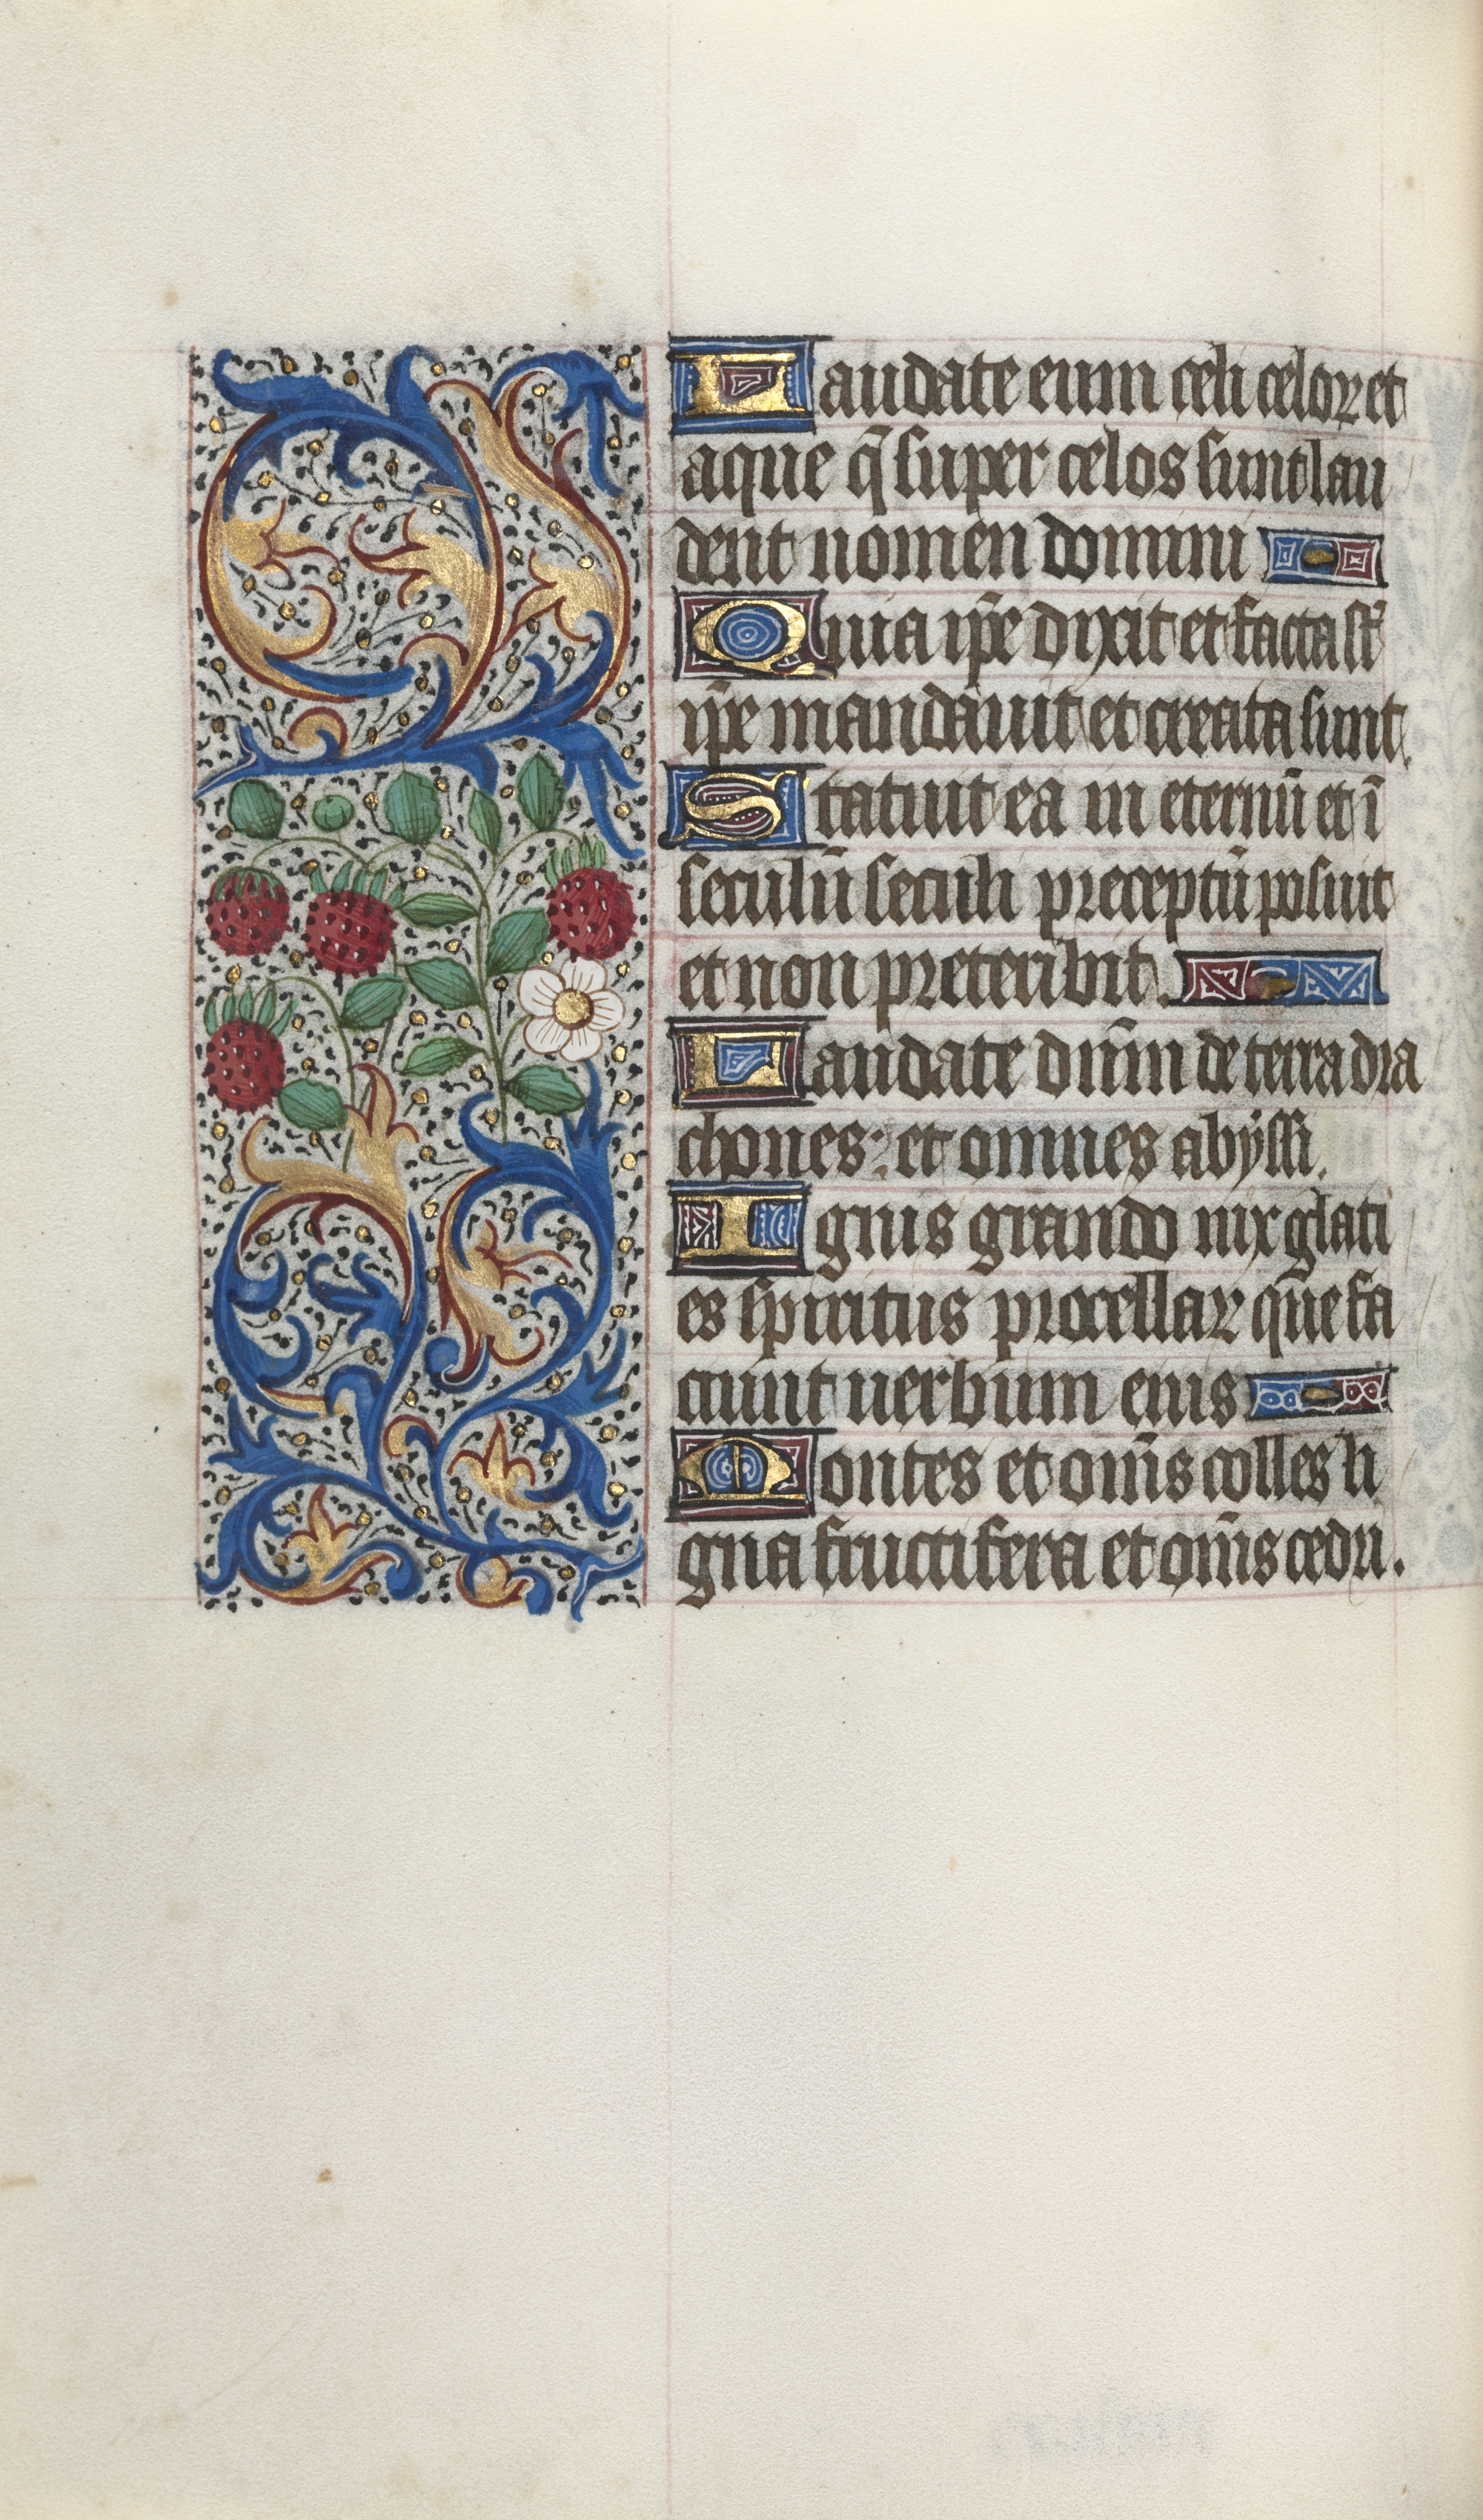 Book of Hours (Use of Rouen): fol. 44v